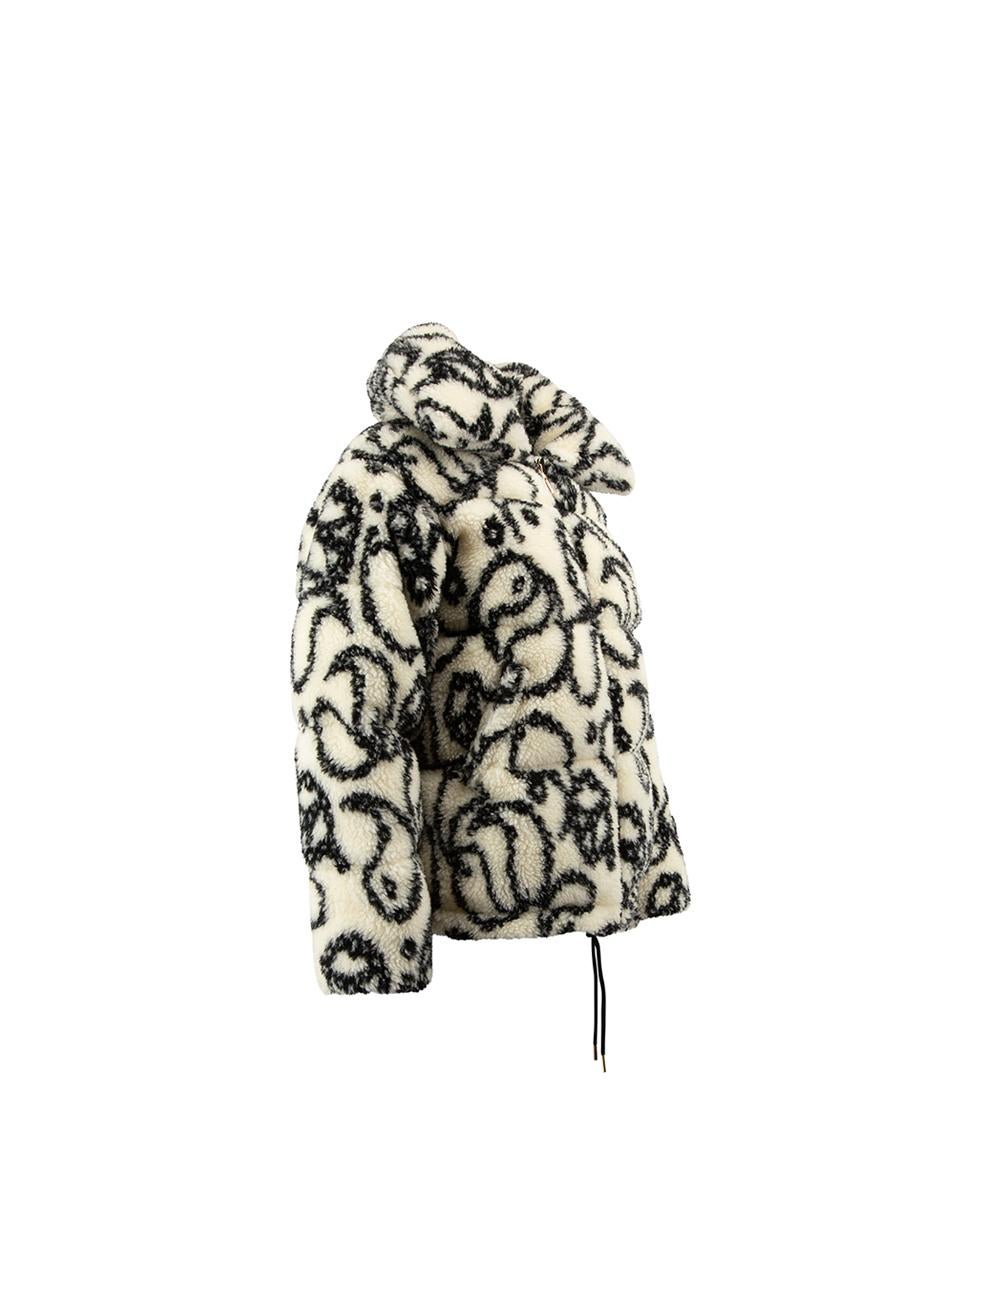 CONDITION is Very good. Hardly any visible wear to coat is evident on this used Sandro designer resale item. This item comes with original garment bag.



Details


Cream and black

Shearling wool

Puffer jacket

Abstract pattern

2x Front side